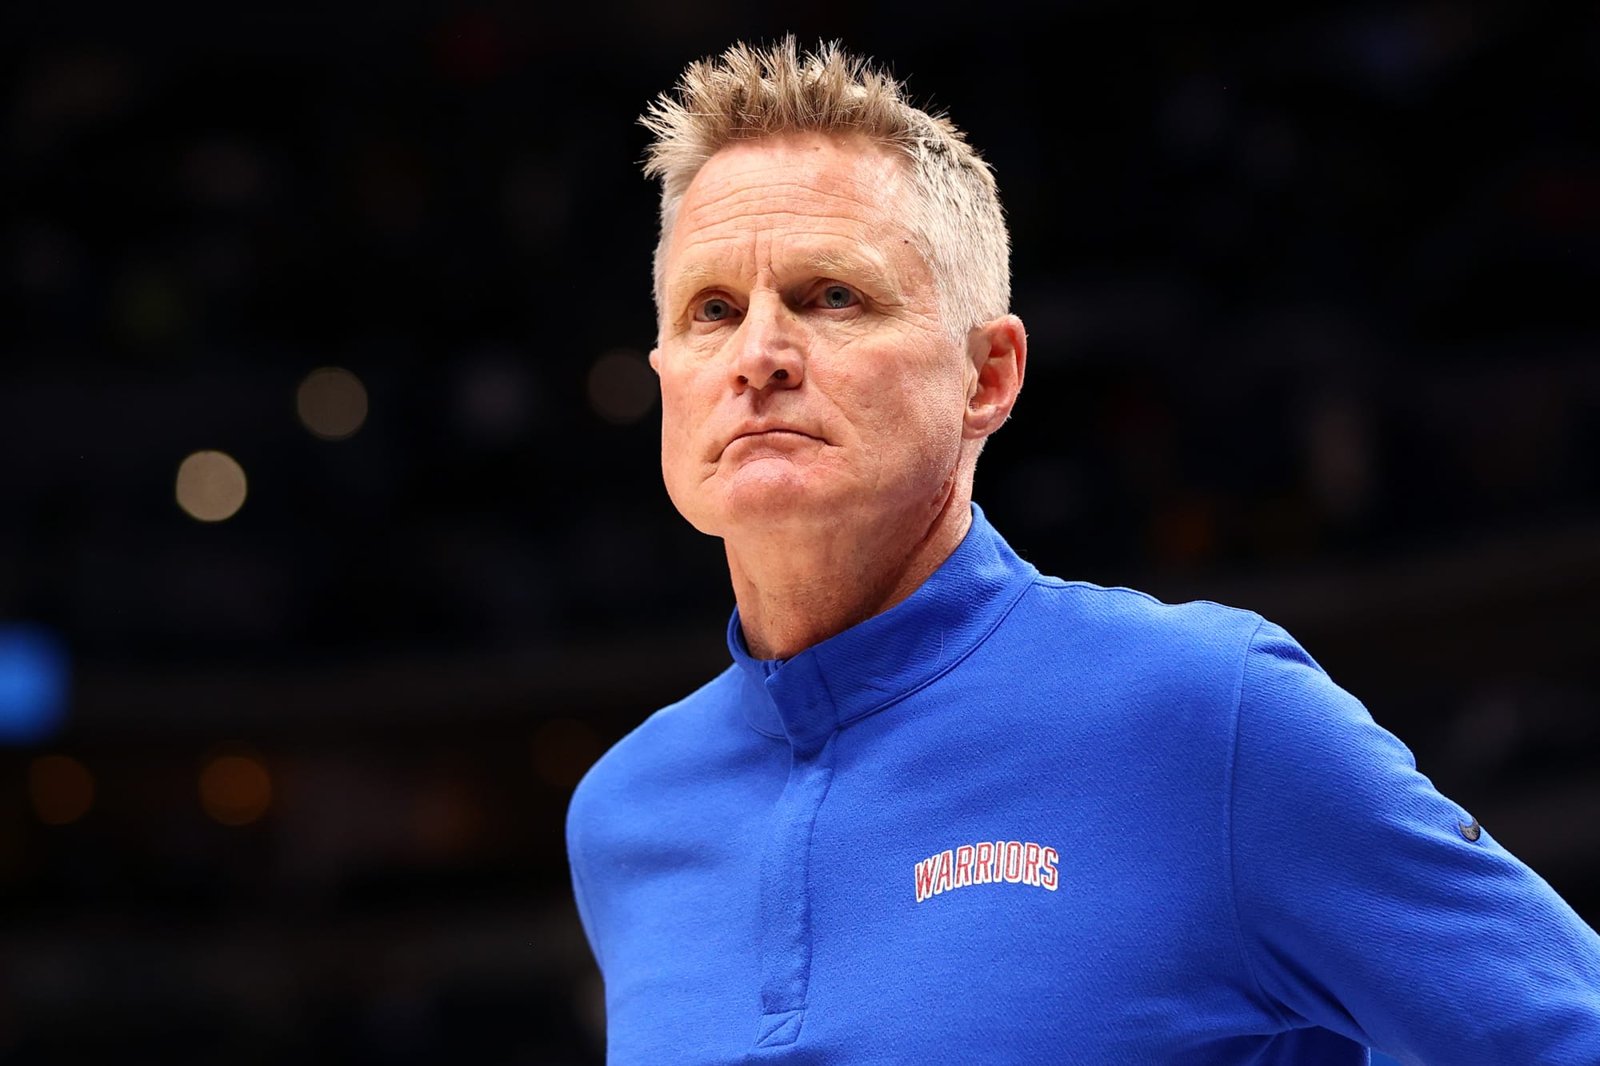 Steve Kerr will not coach the Warriors in Game 5 against Memphis